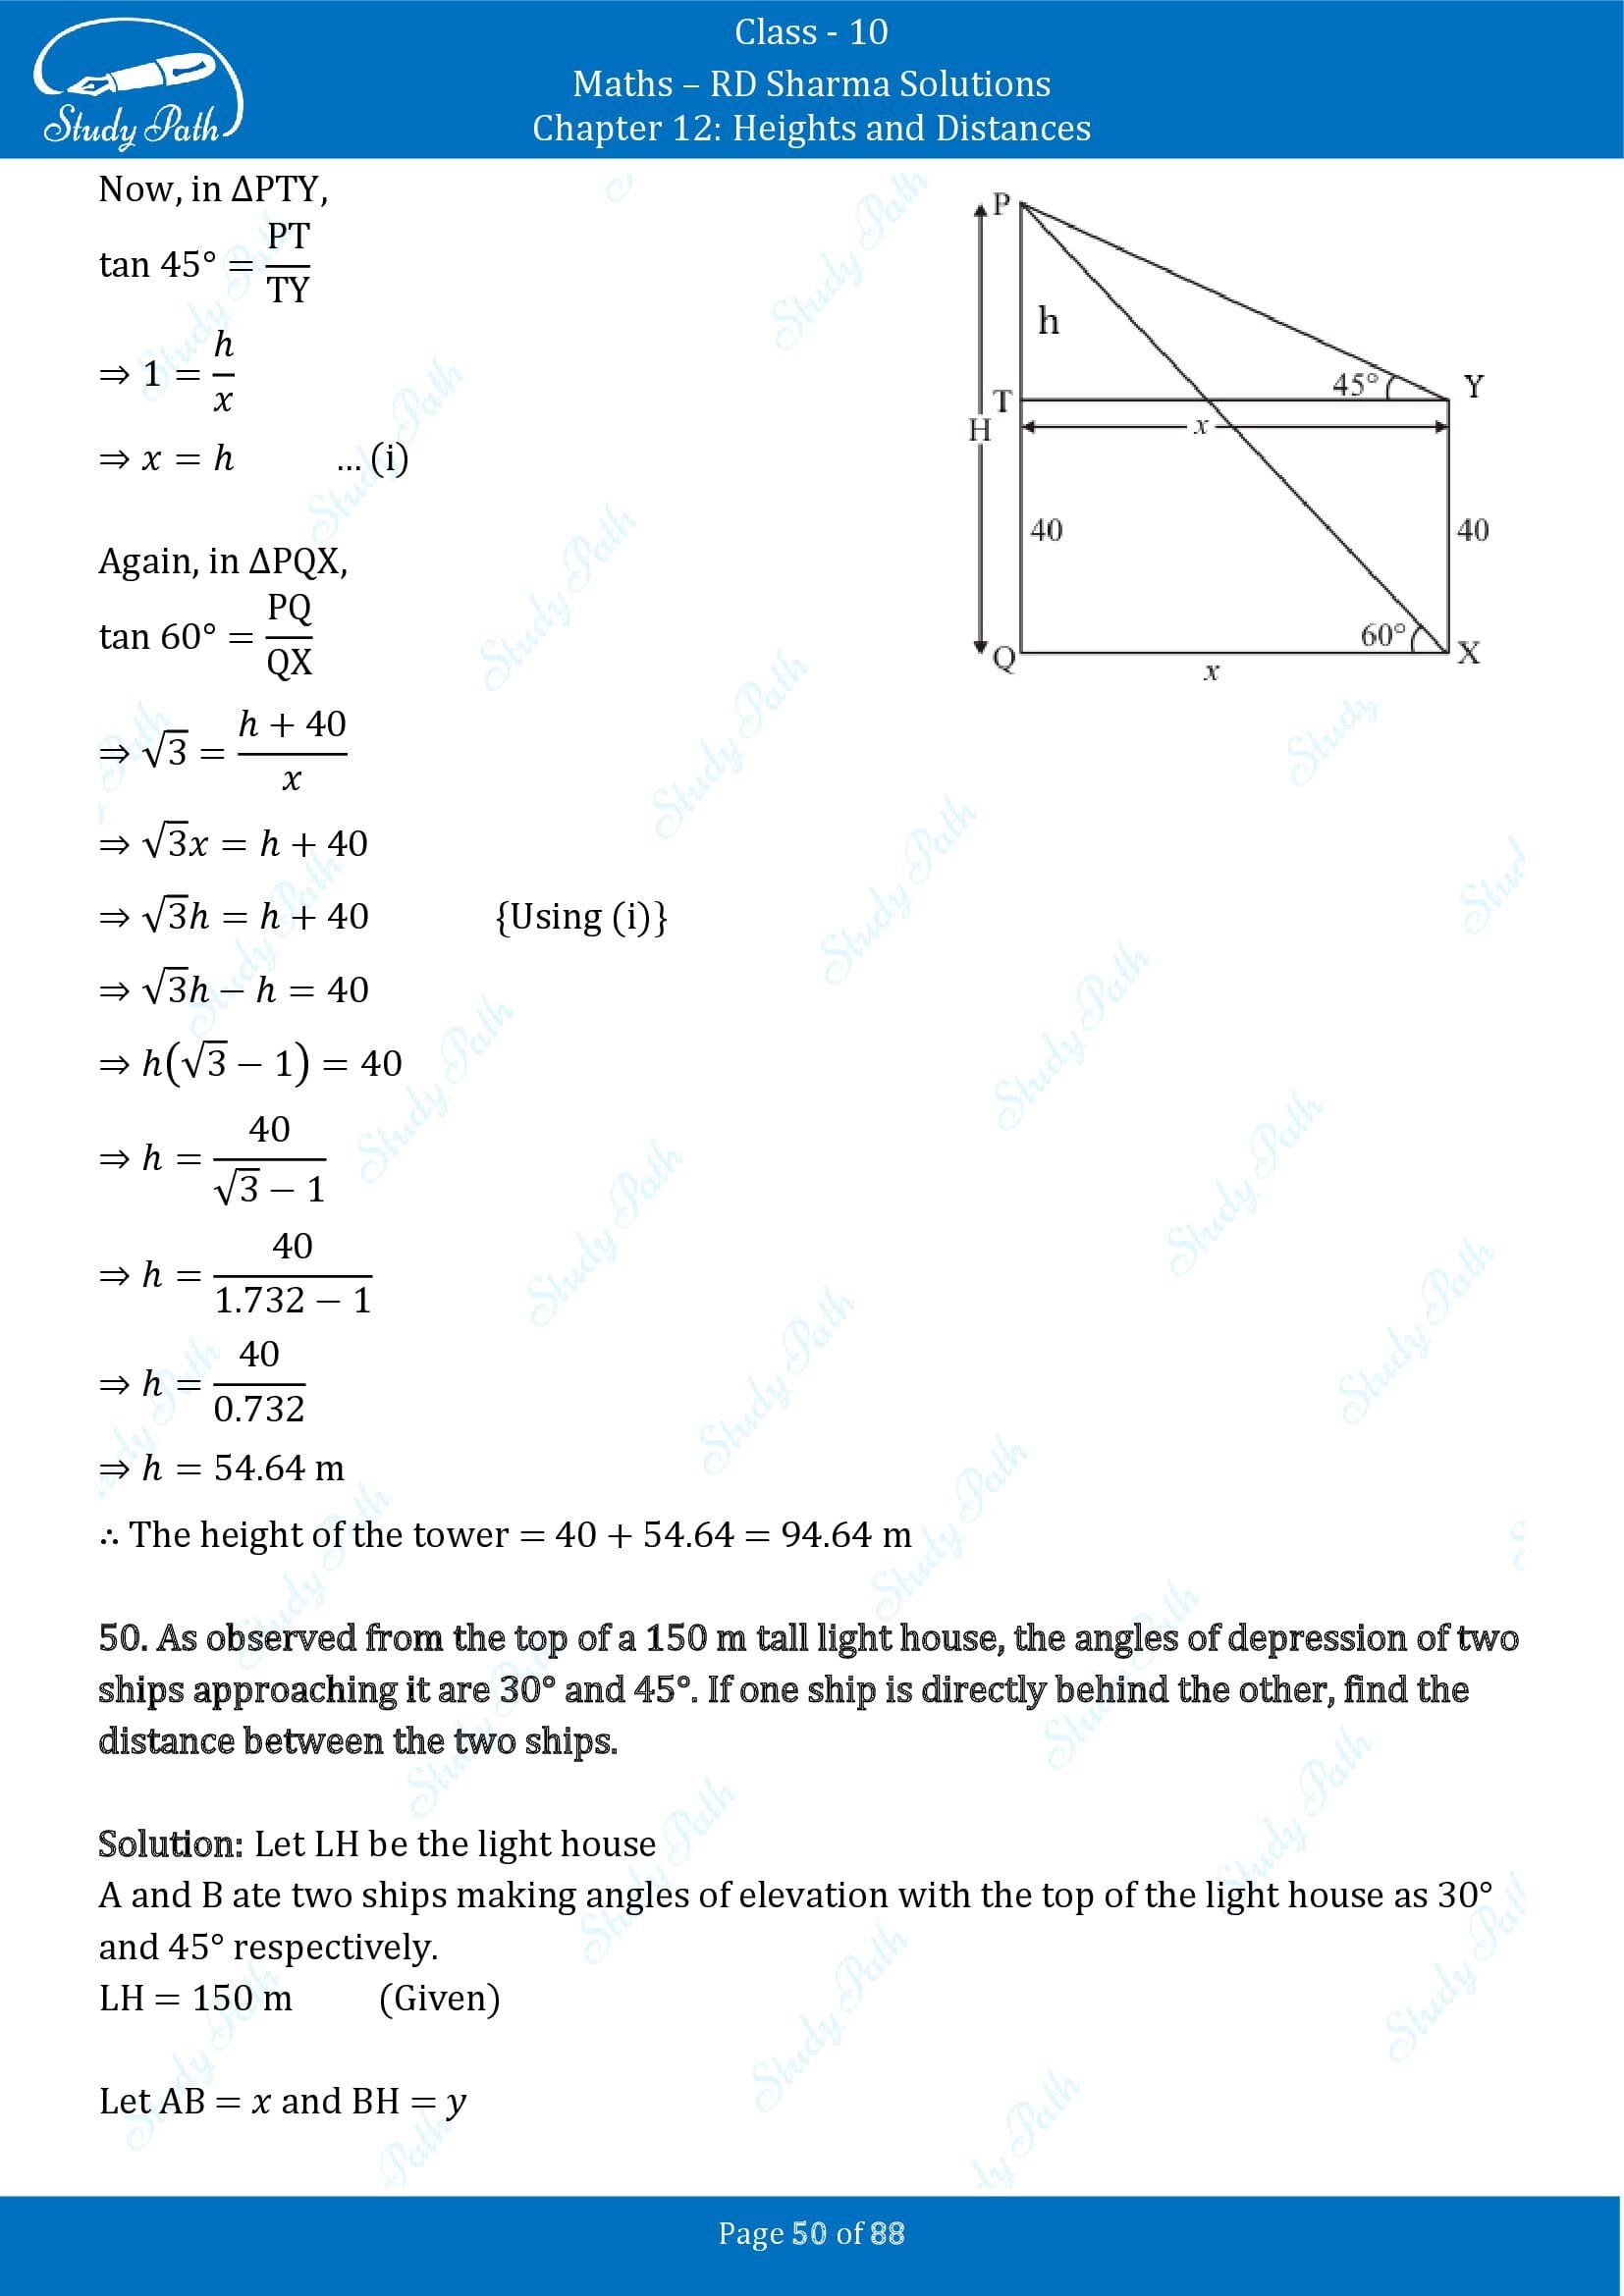 RD Sharma Solutions Class 10 Chapter 12 Heights and Distances Exercise 12.1 00050